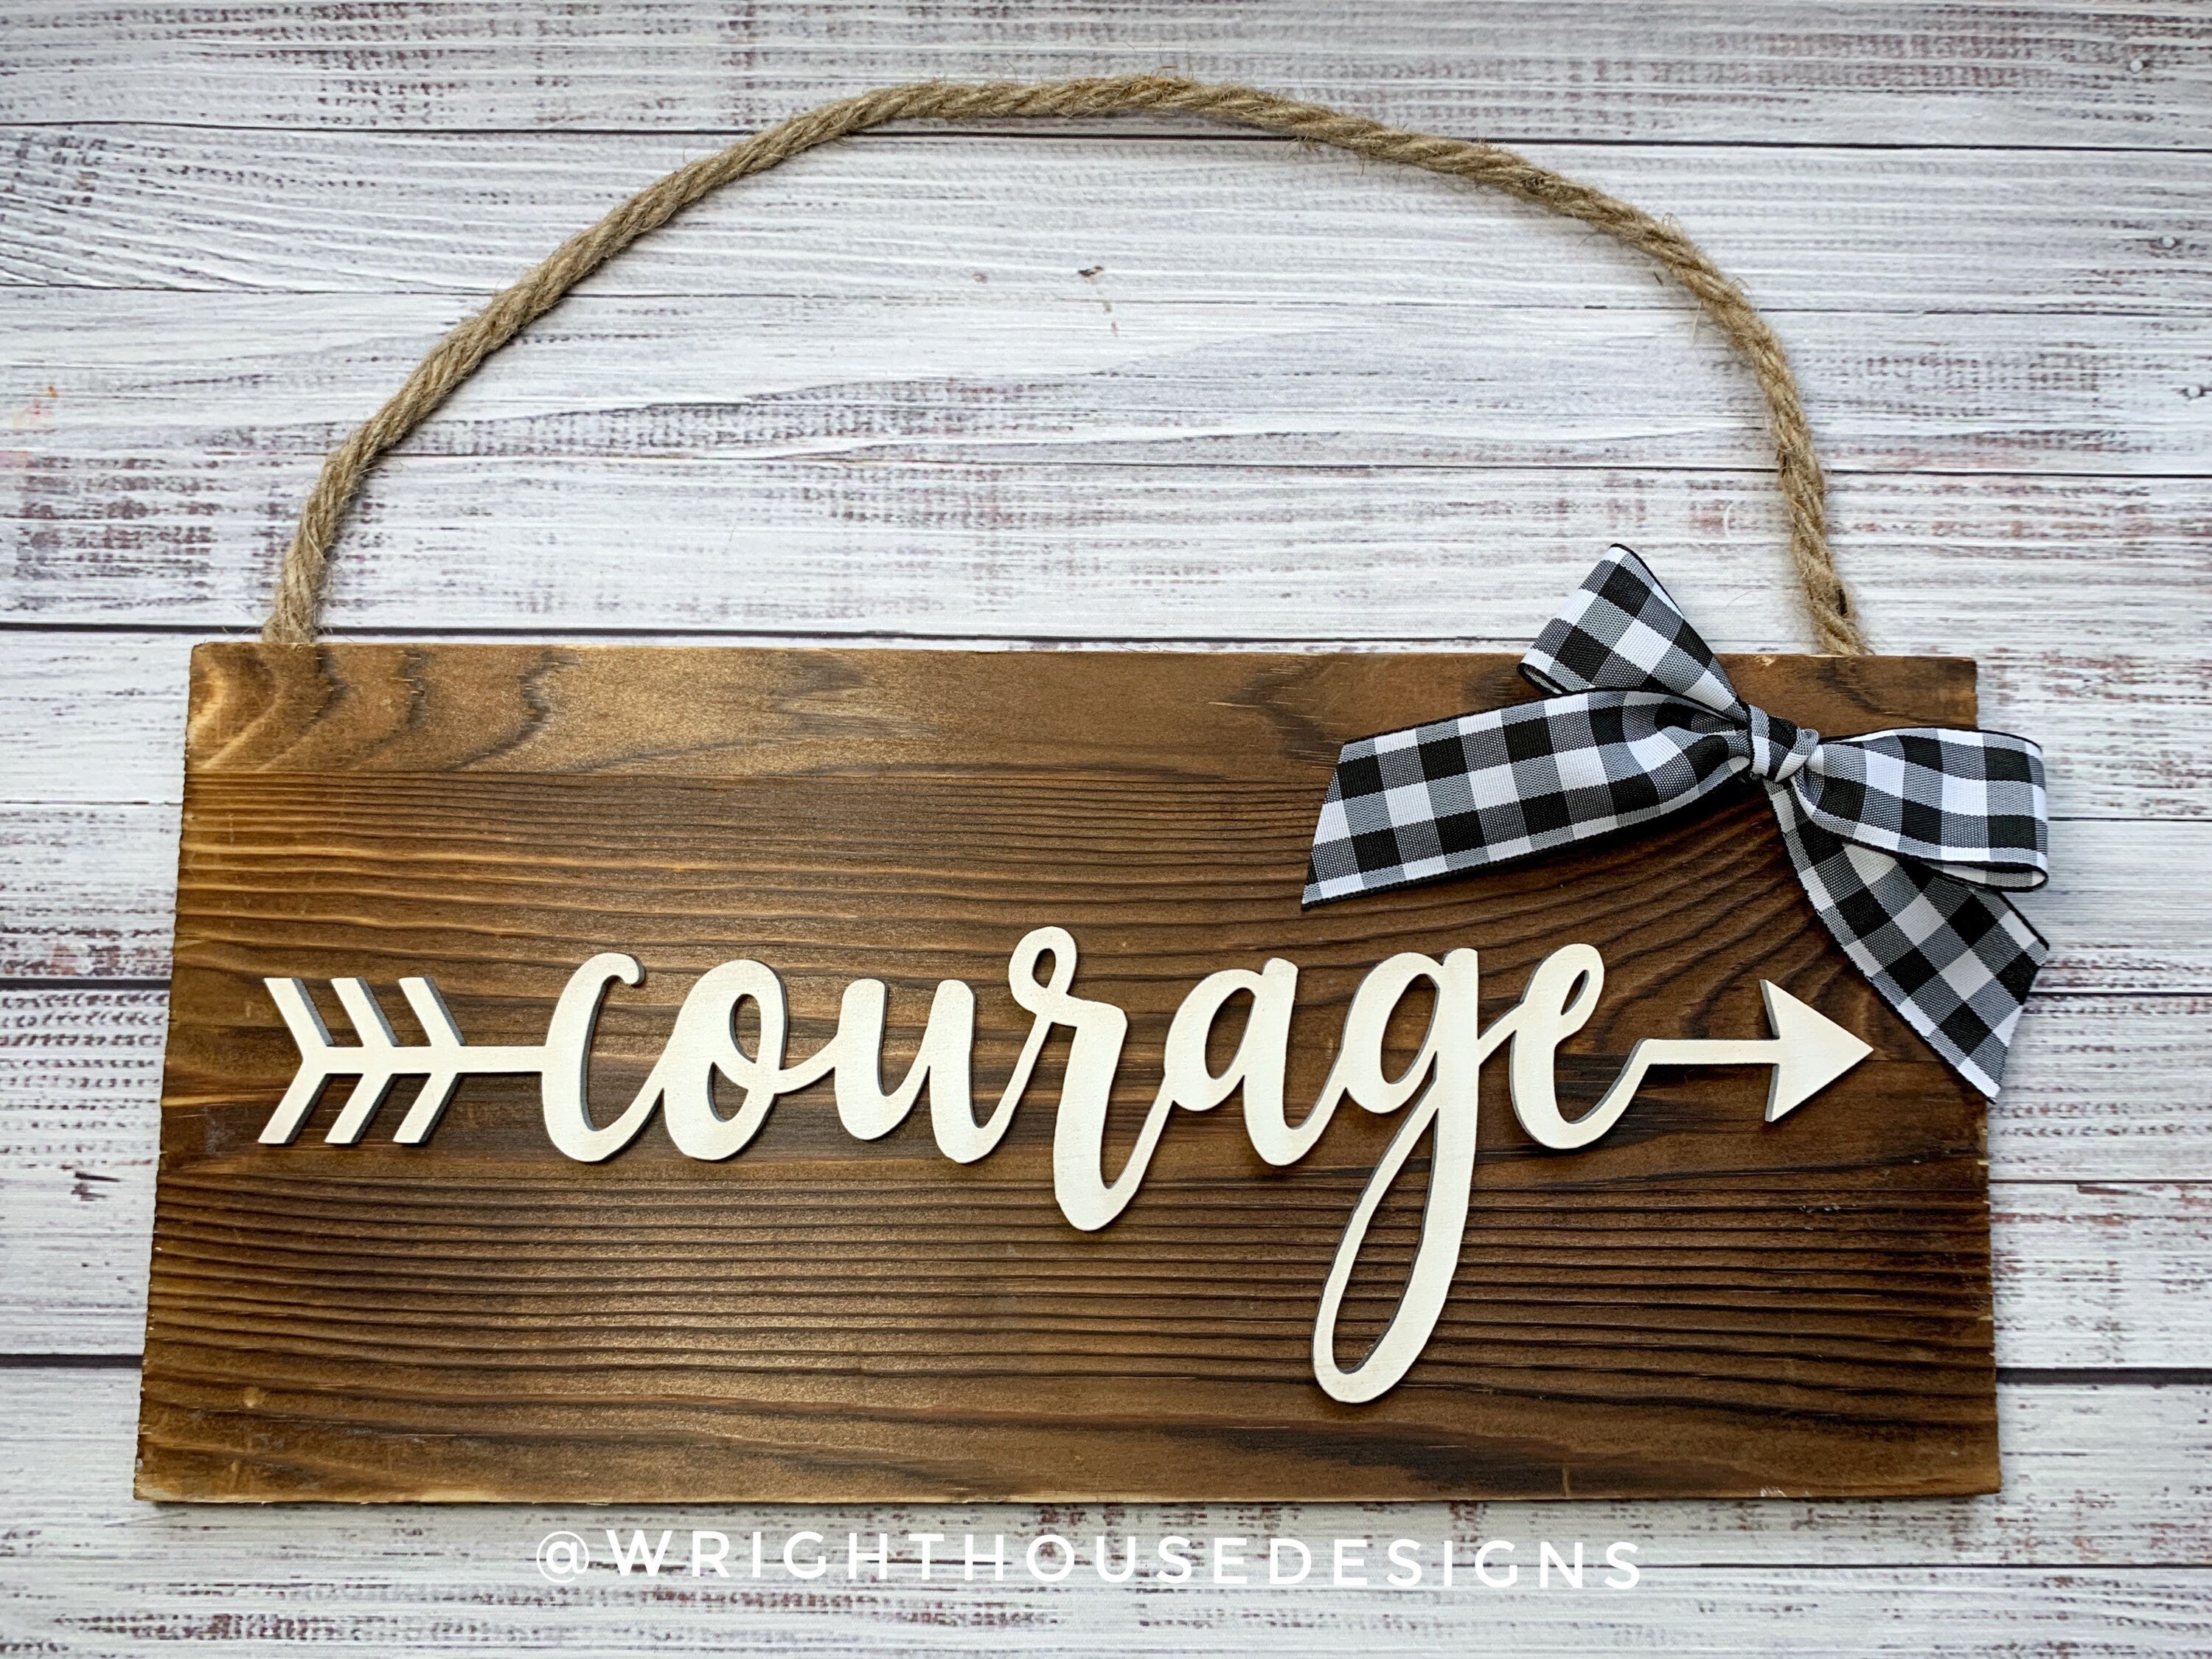 Courage Arrow Word Art - Rustic Farmhouse - Reclaimed Pallet Plank Board Sign - Wooden Wall Art - Bookshelf Decor and She Shed Signs